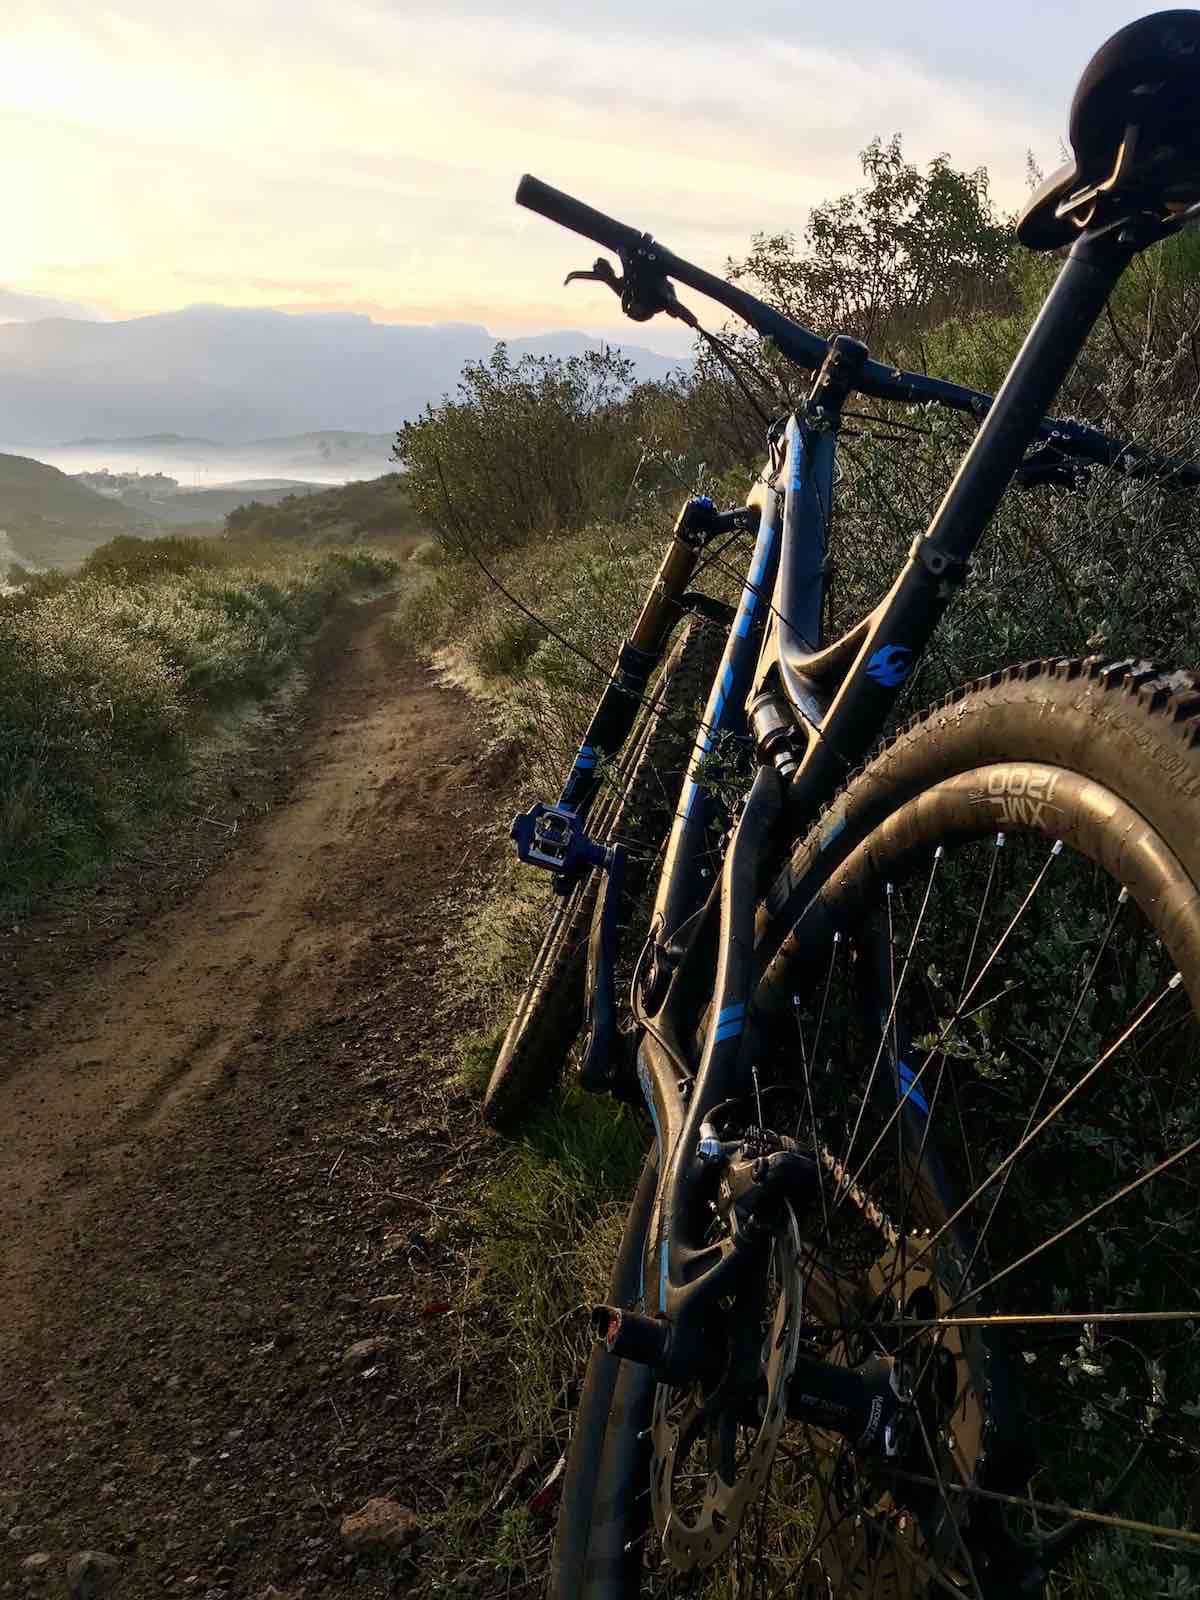 bikerumor pic of the day open trail on the Dos Vientos trail in california, right after sunrise. Mountain bike leaning against berm on dirt trail as morning light fills the sky.